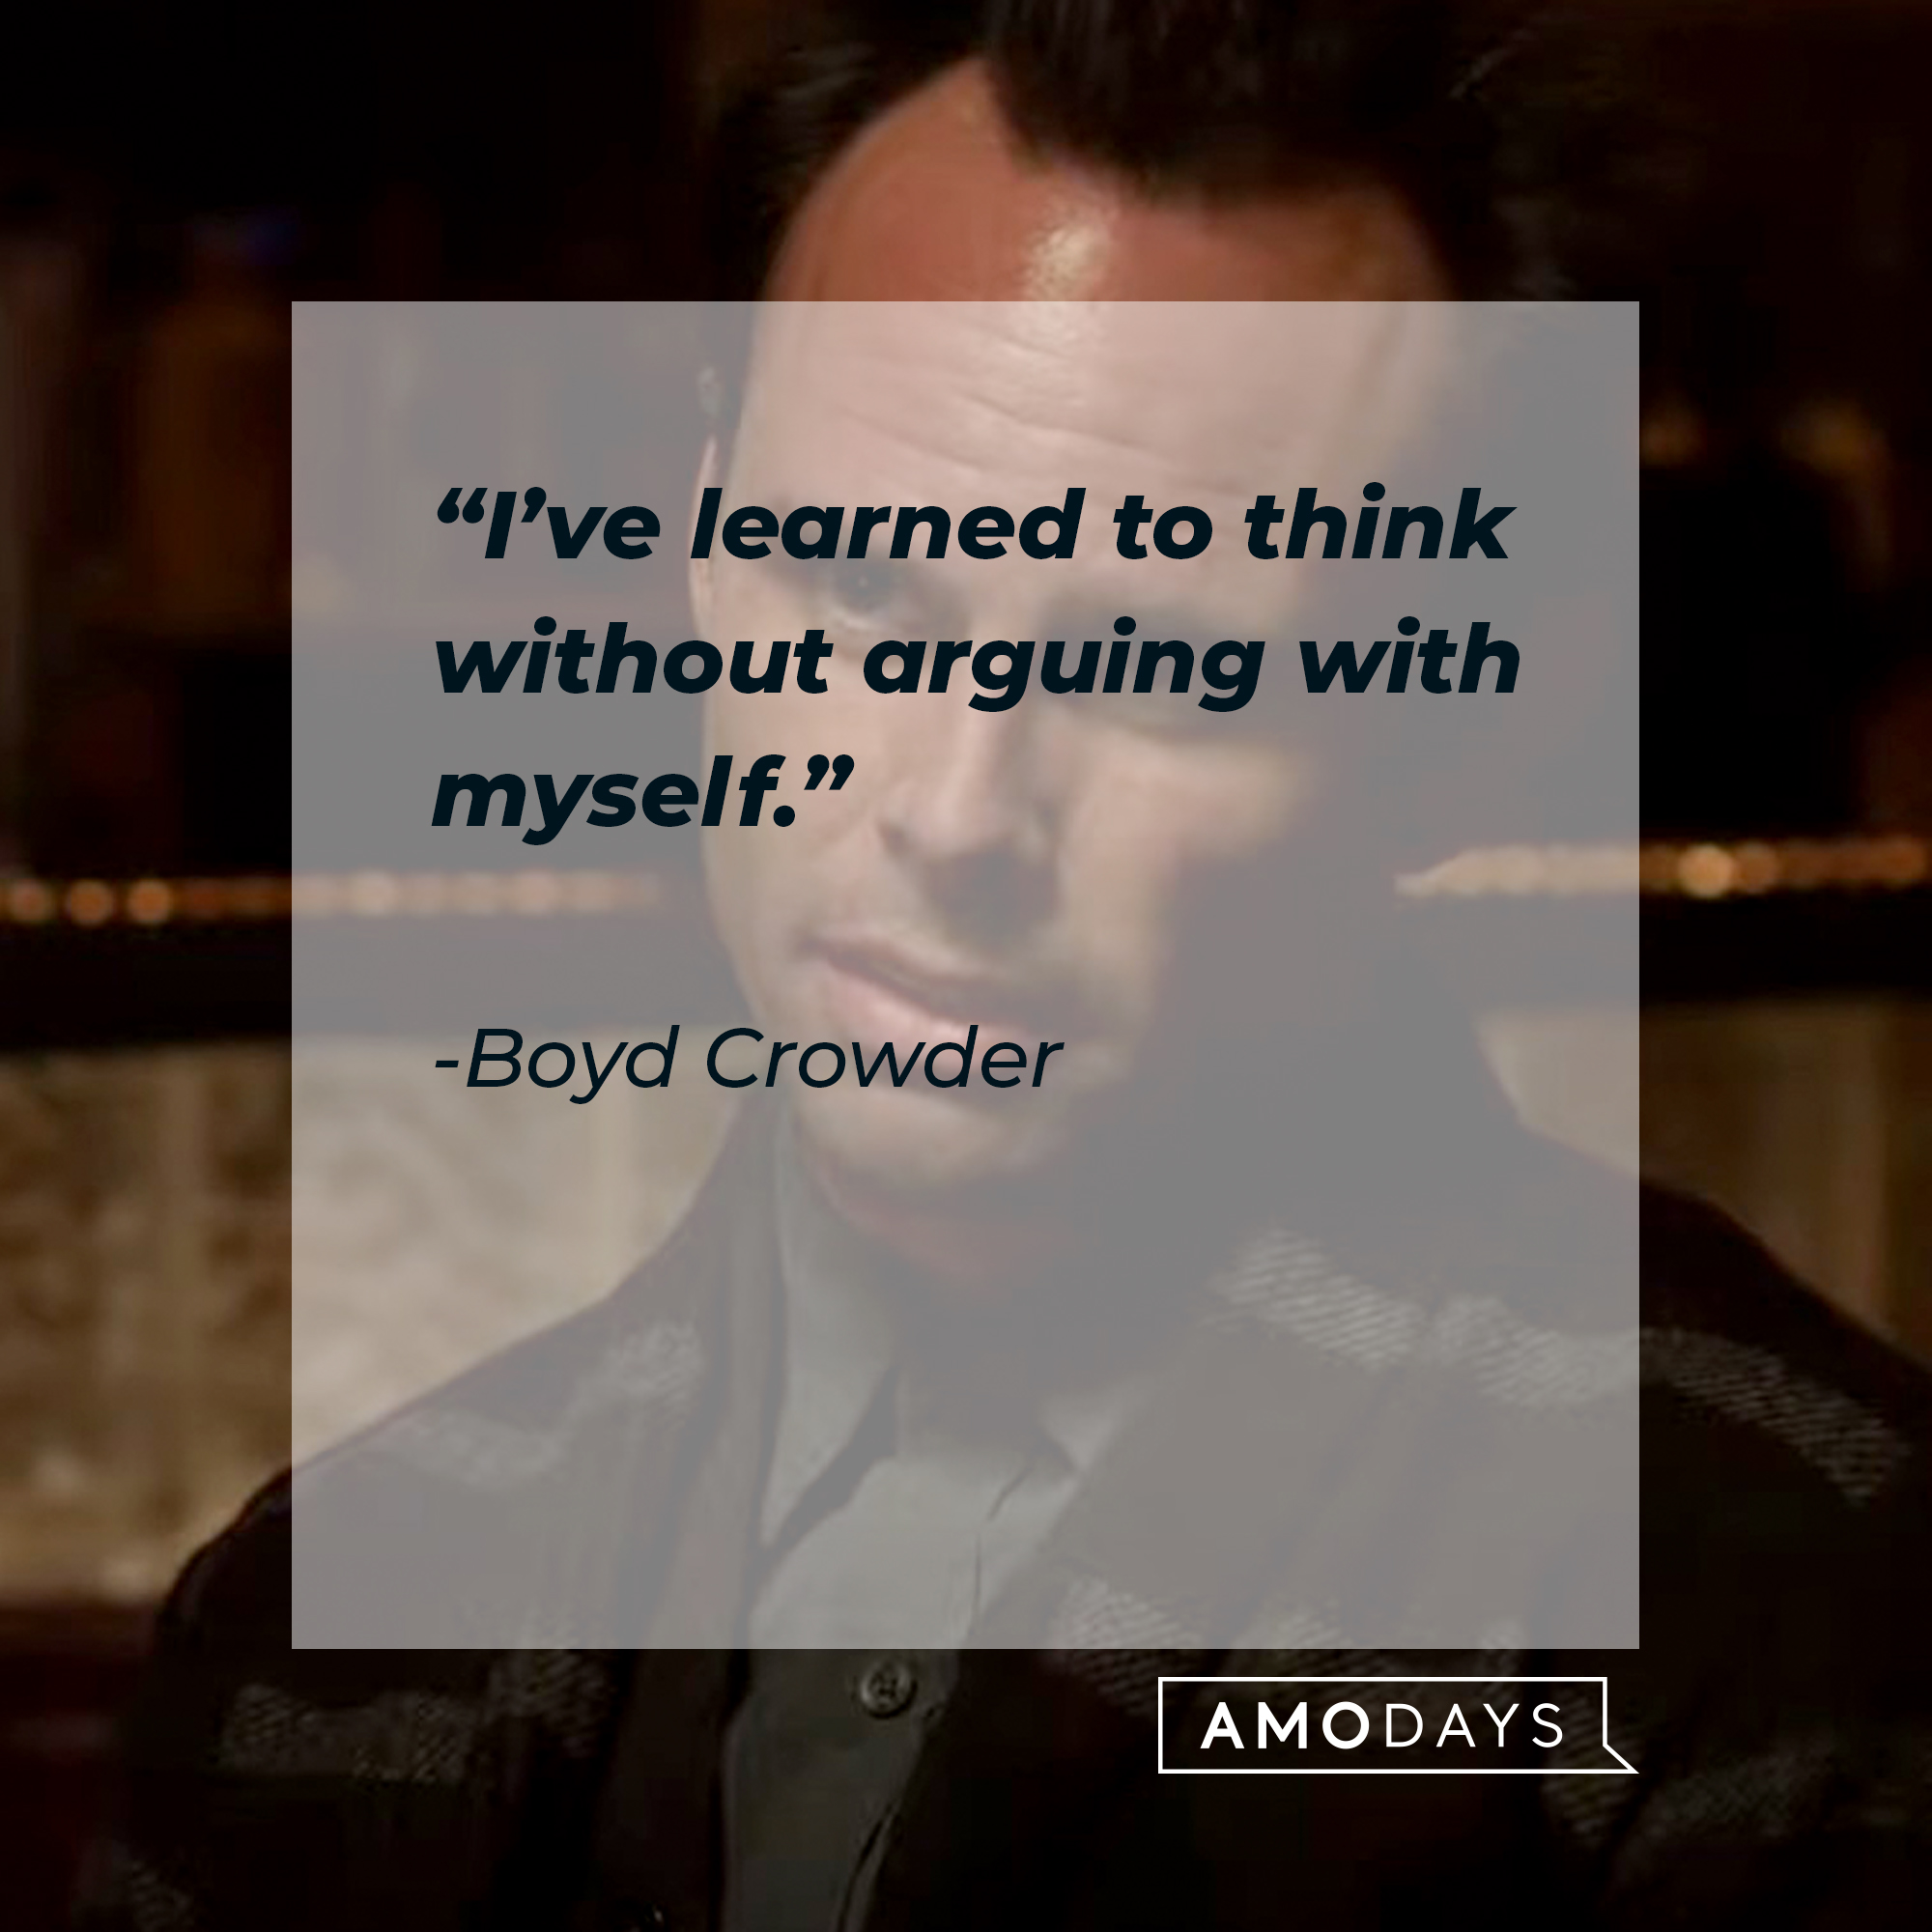 An image of  Boyd Crowder with his quote: “I’ve learned to think without arguing with myself." | Source:  youtube.com/FXNetworks